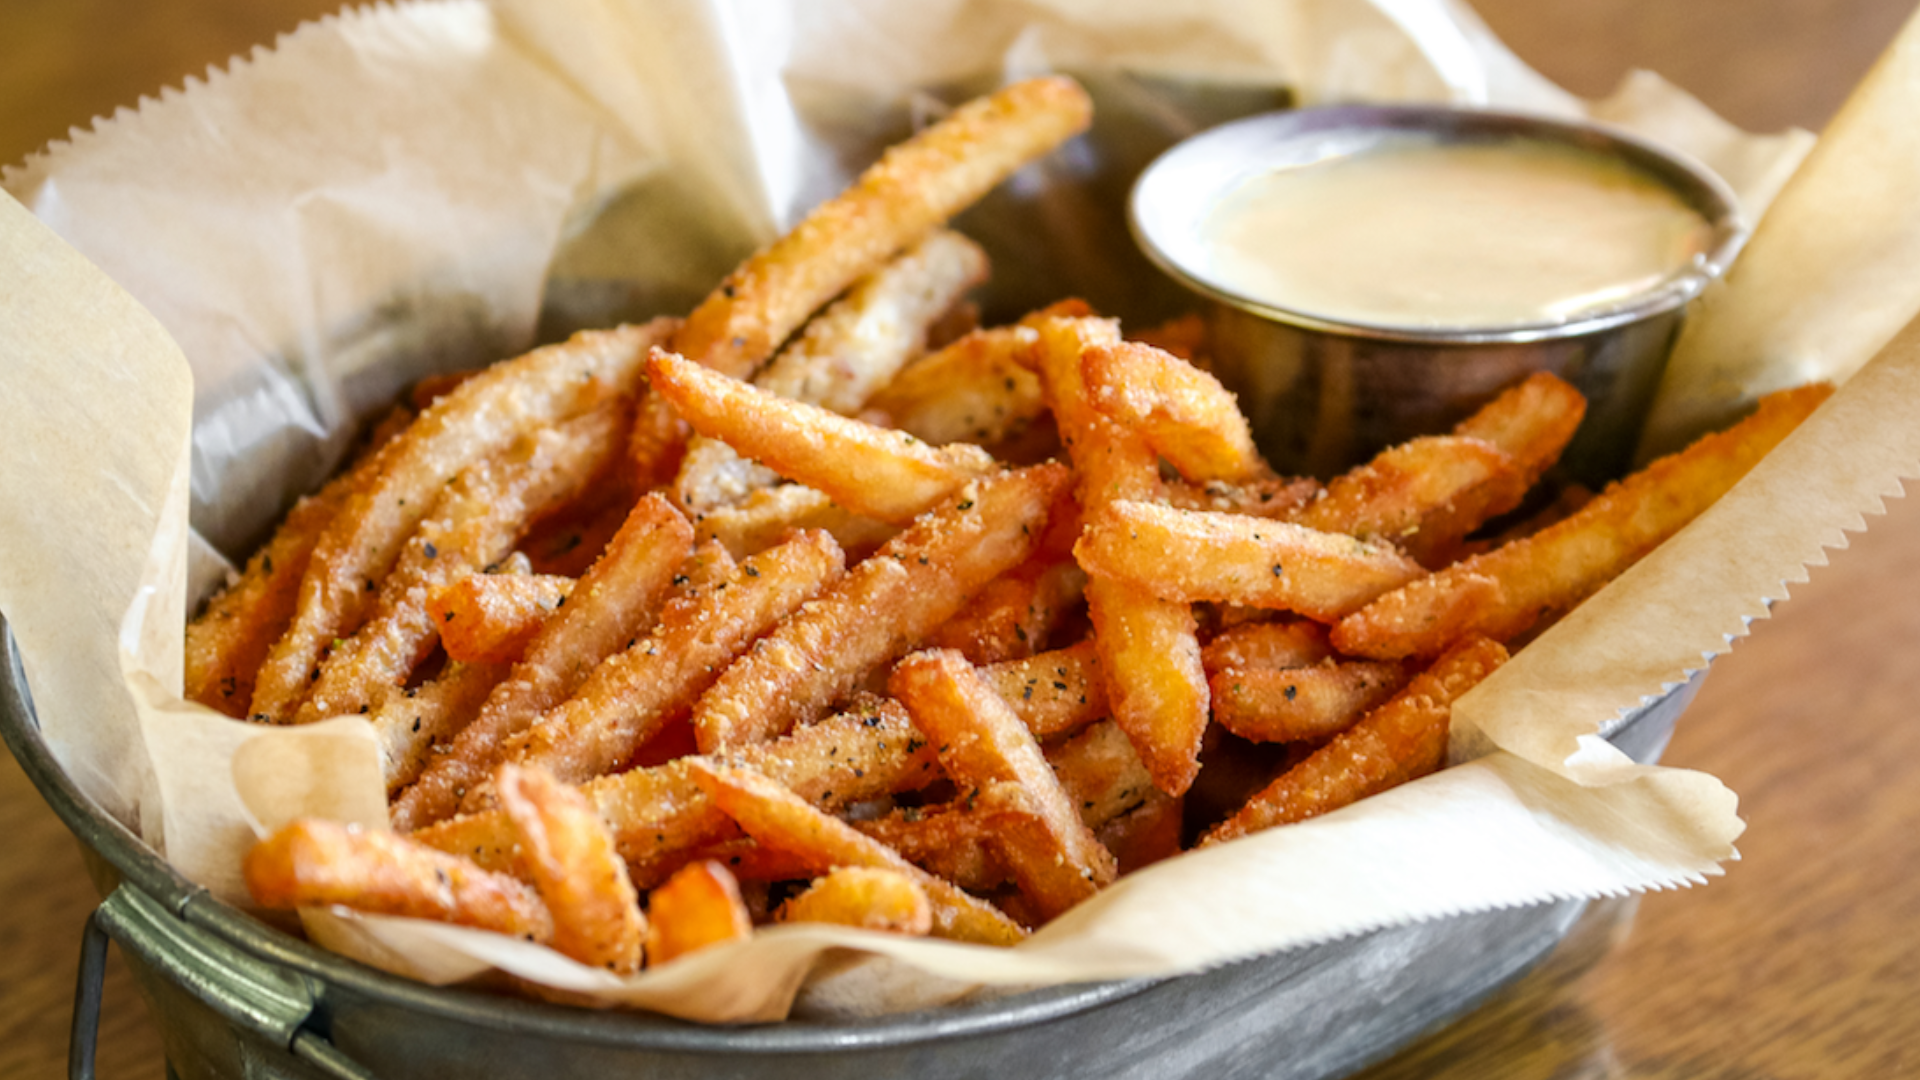 ...and it's outta this world! HopCat is calling their fan favorite fries 'Cosmik Fries' from now on.